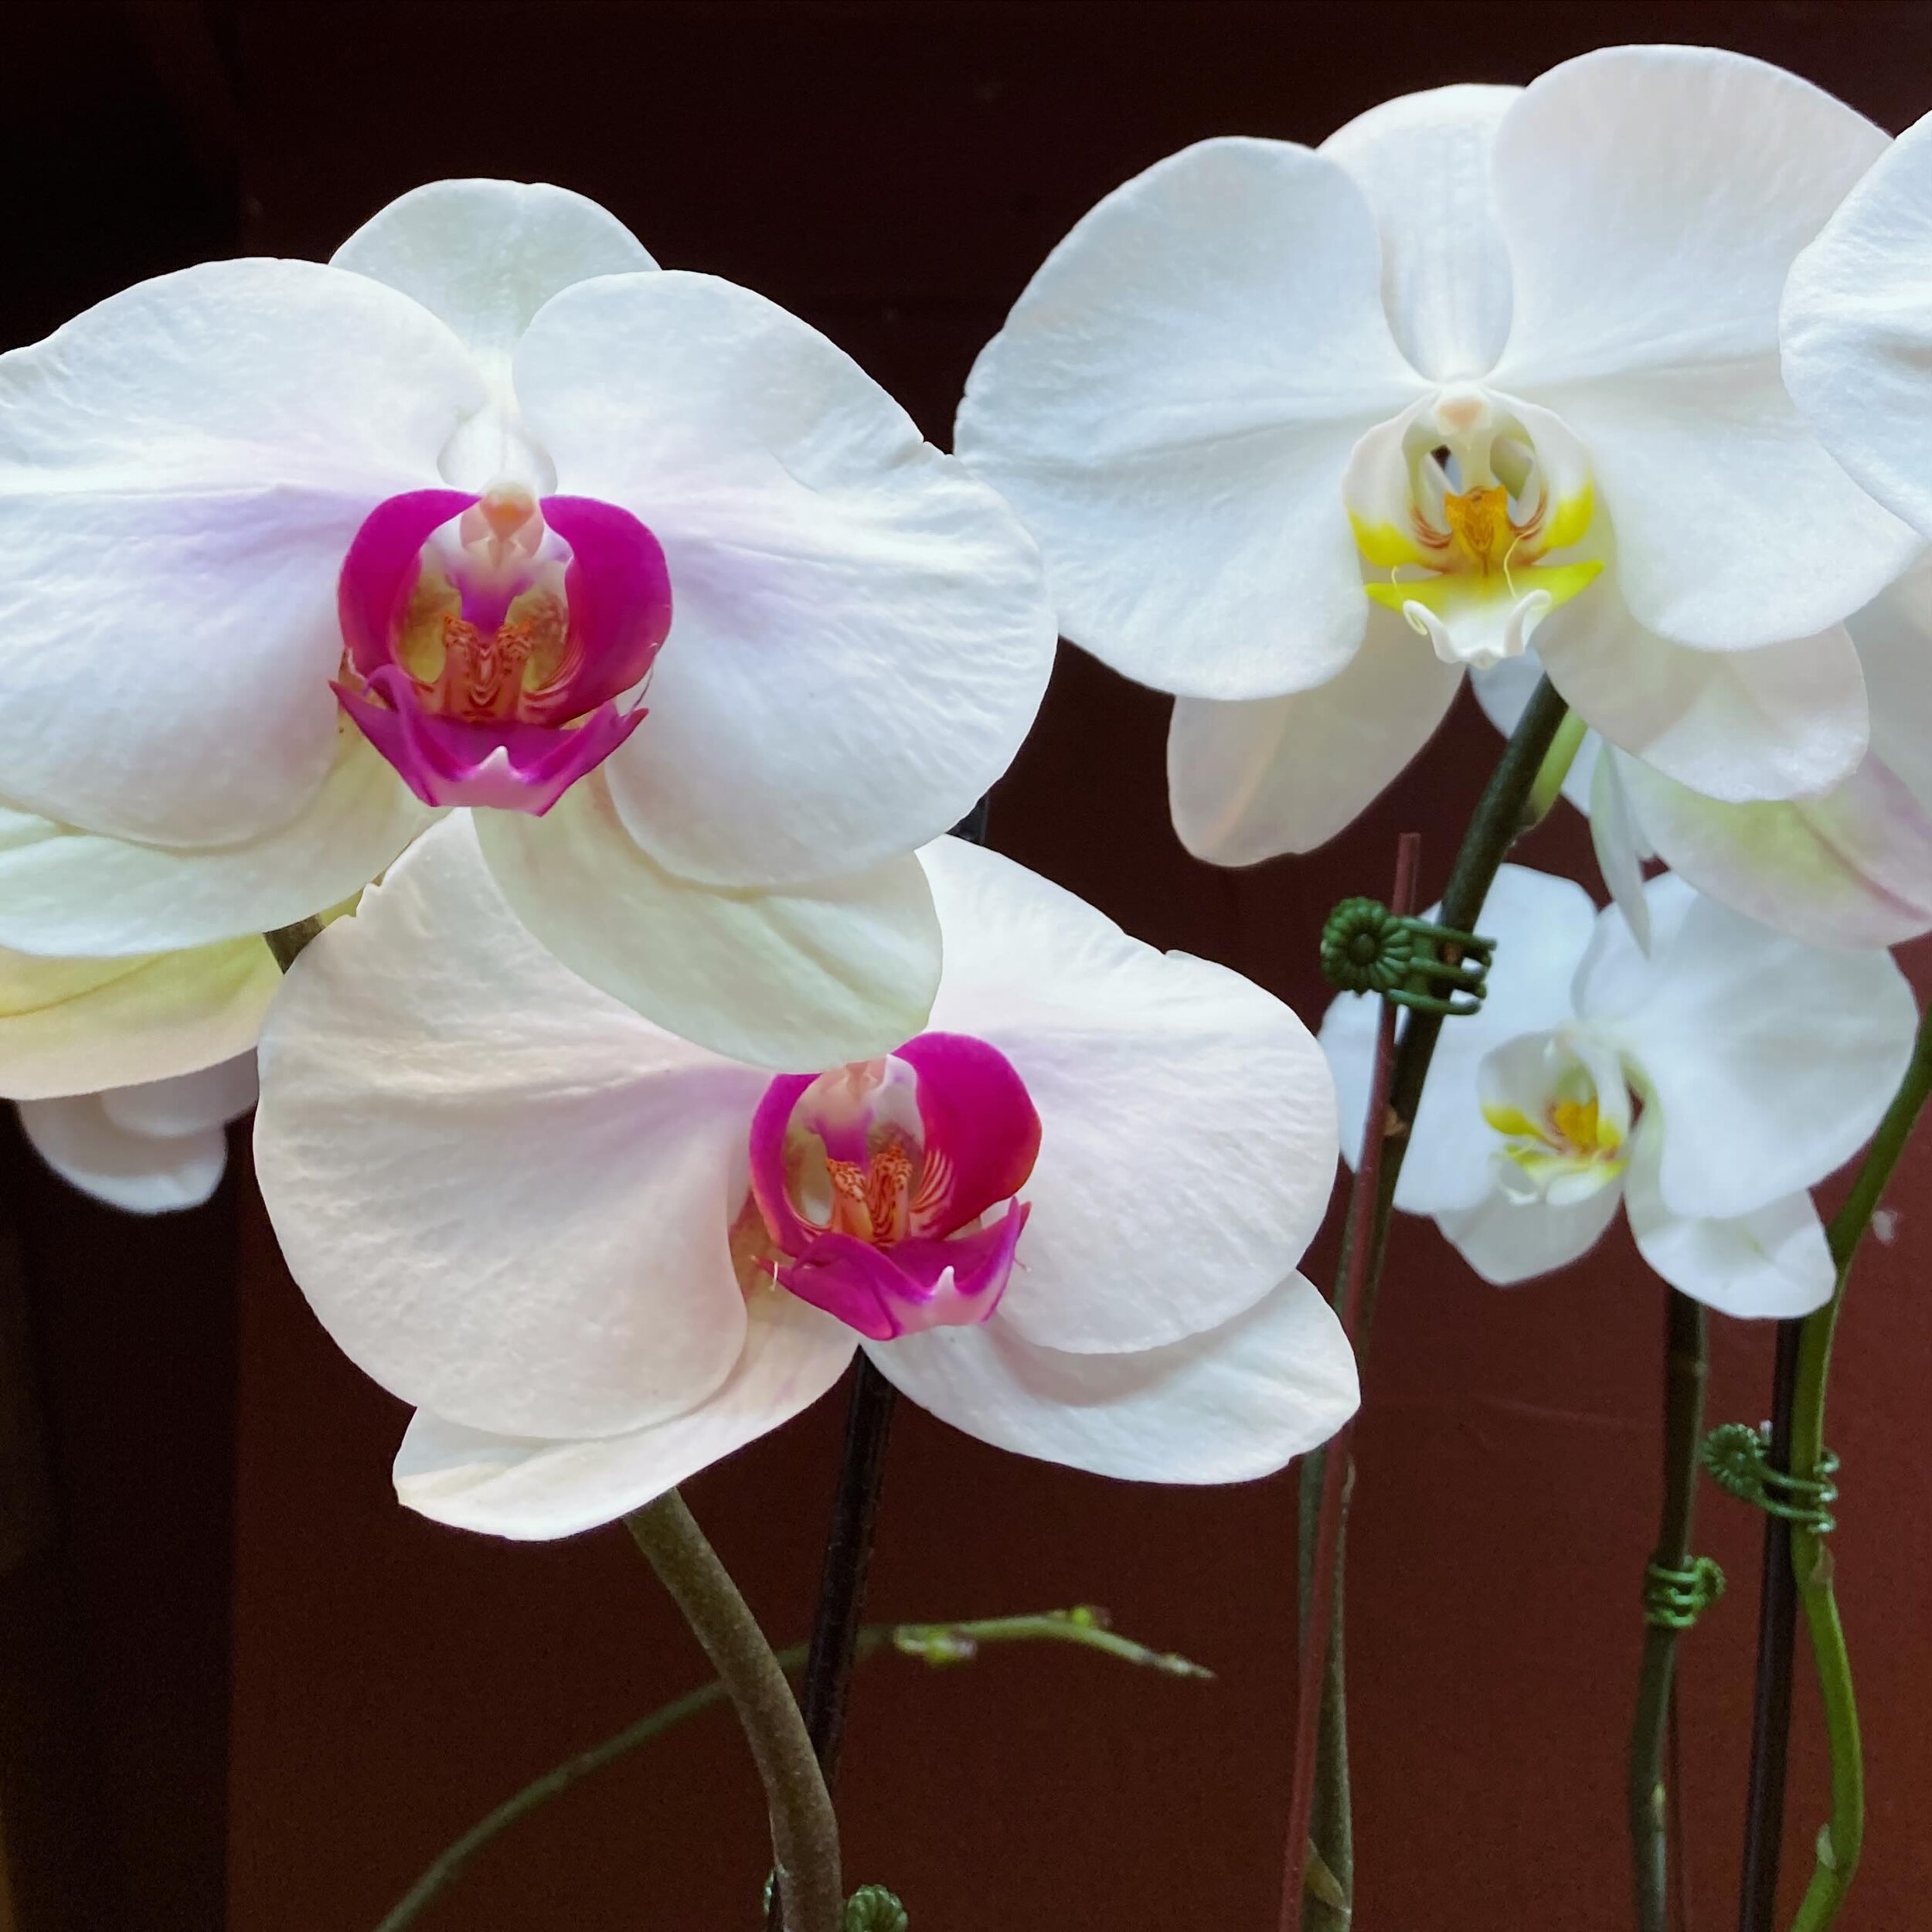 Discover the elegance of our popular white orchids! Introducing pink accented white orchids a unique touch to elevate your space. We have a stock of these beauties waiting for you! Visit our website to explore more 🌸✨🦋💌